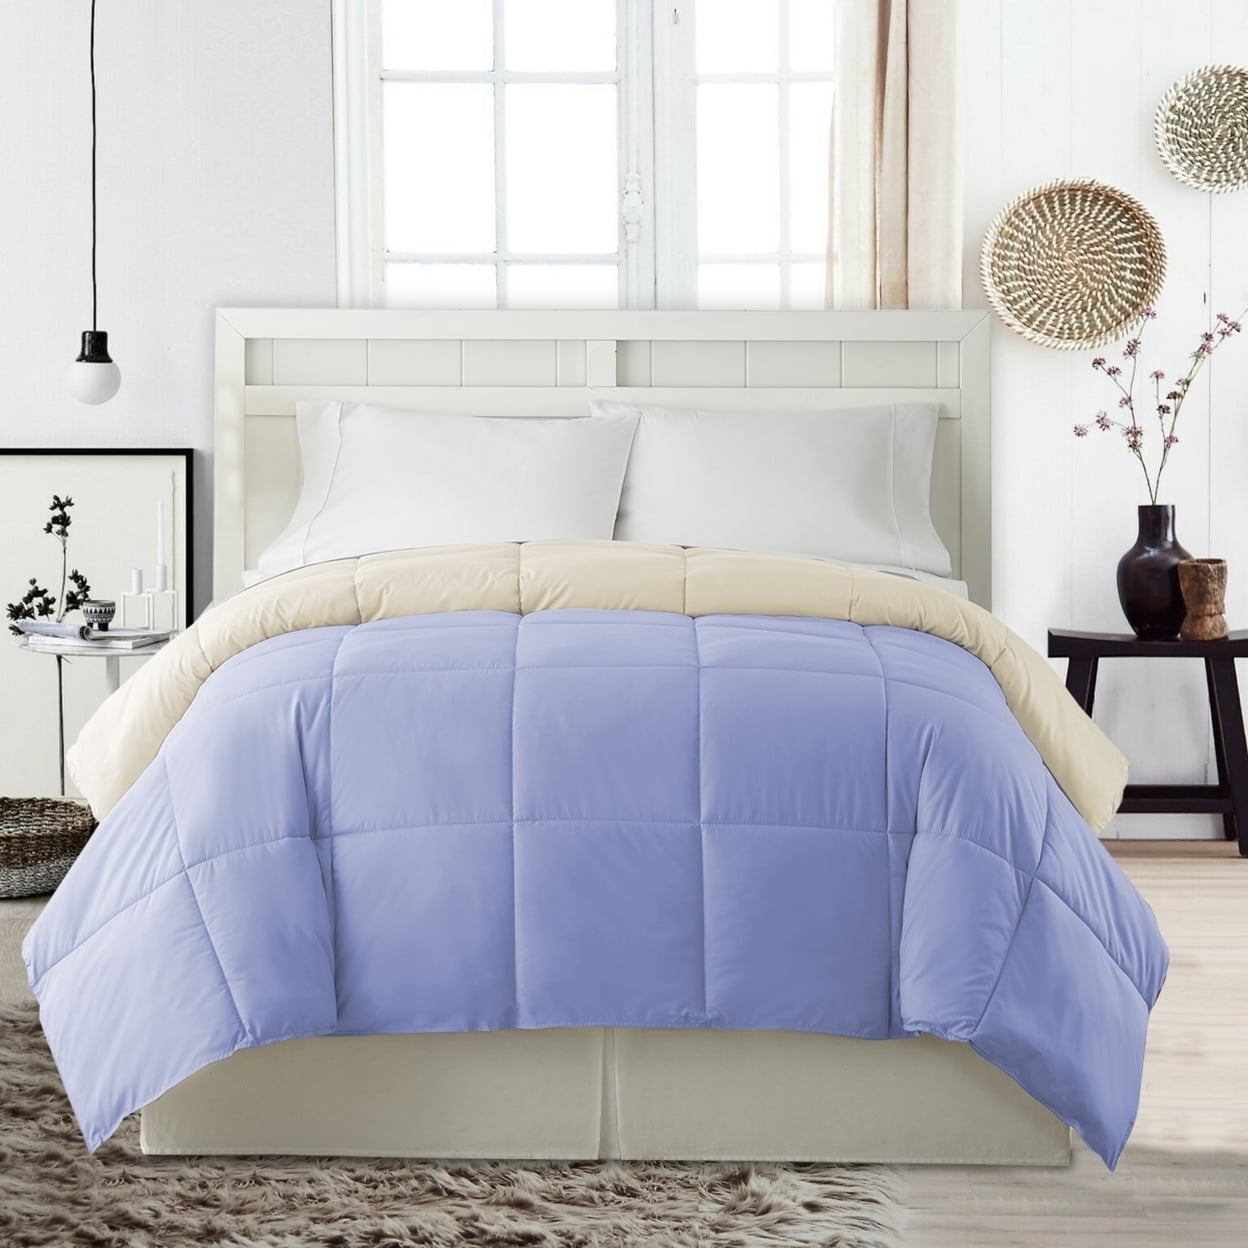 Bm202053 Genoa King Size Box Quilted Reversible Comforter, Blue & Cream